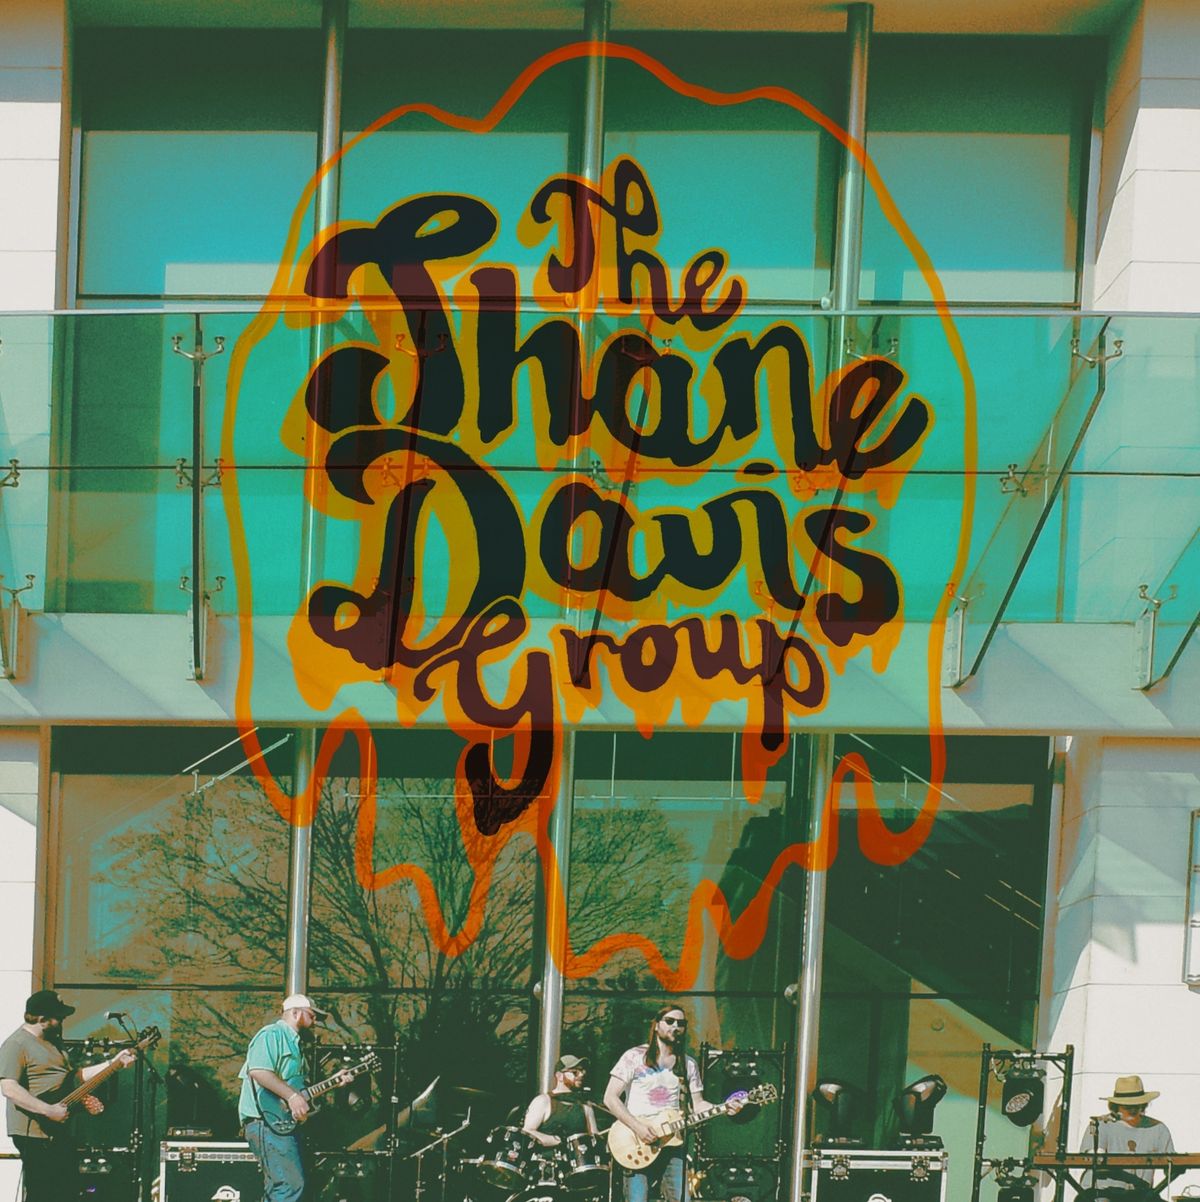 Shane Davis Group at The Camp on the 4th